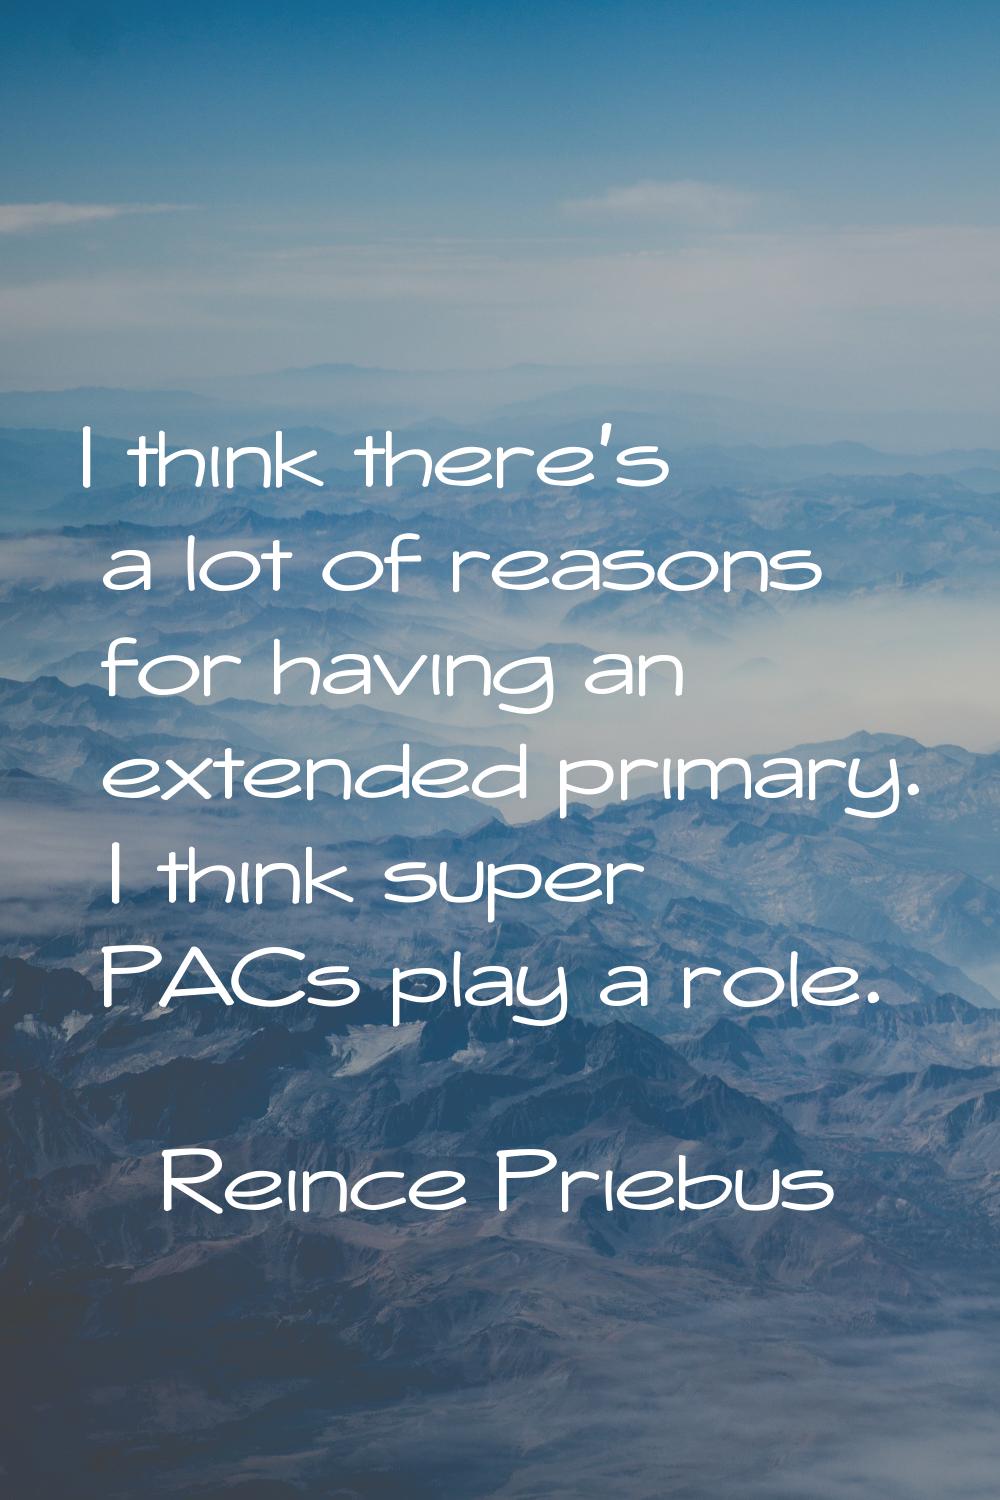 I think there's a lot of reasons for having an extended primary. I think super PACs play a role.